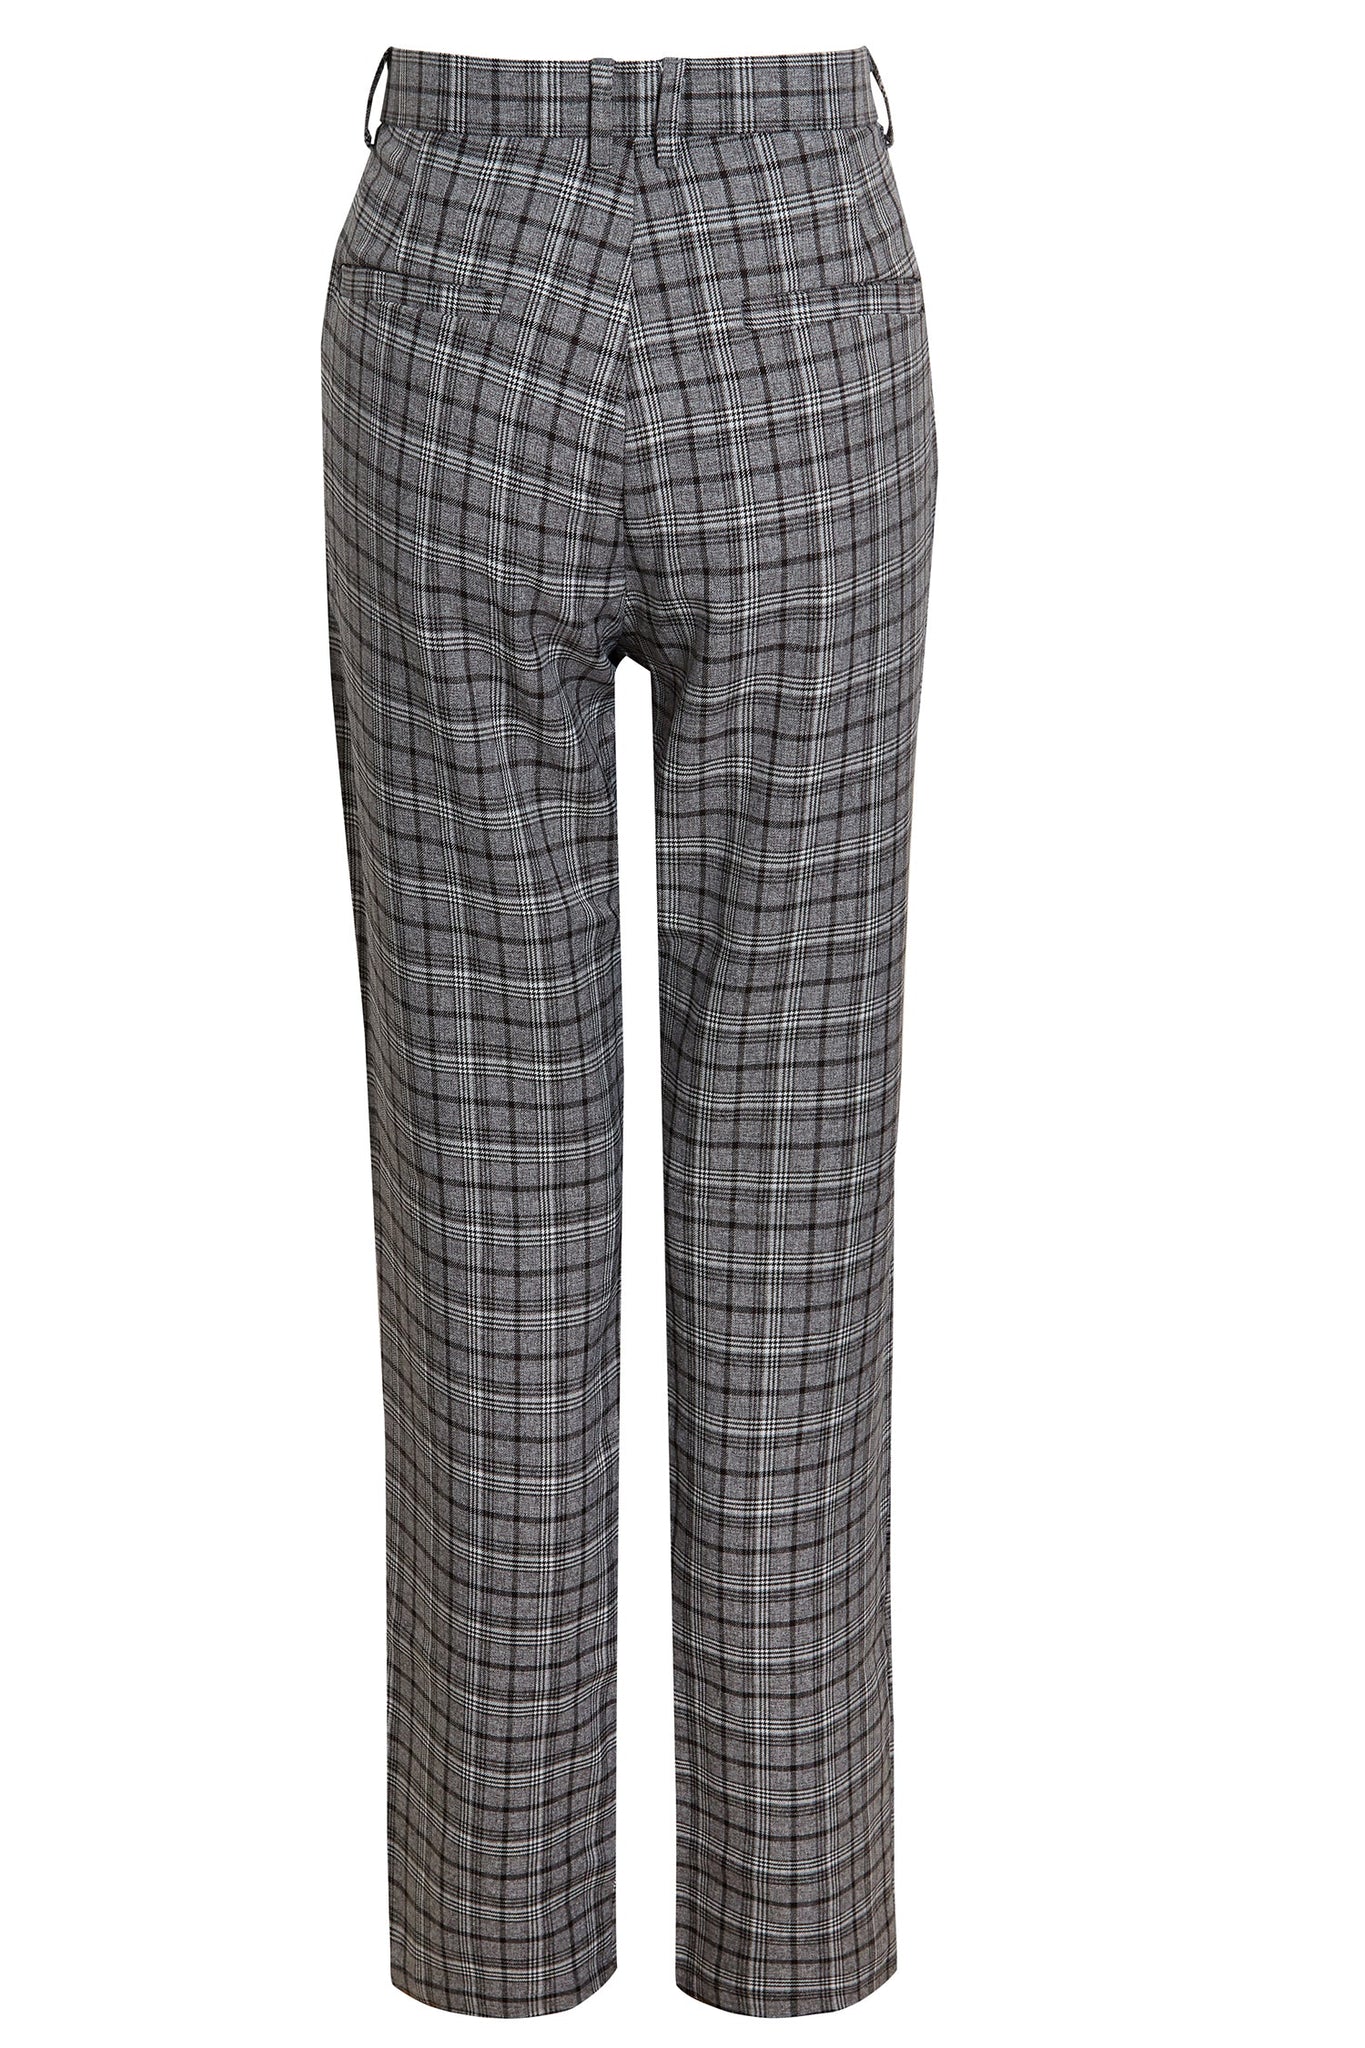 CHECK SLIM FIT TAILORED TROUSER